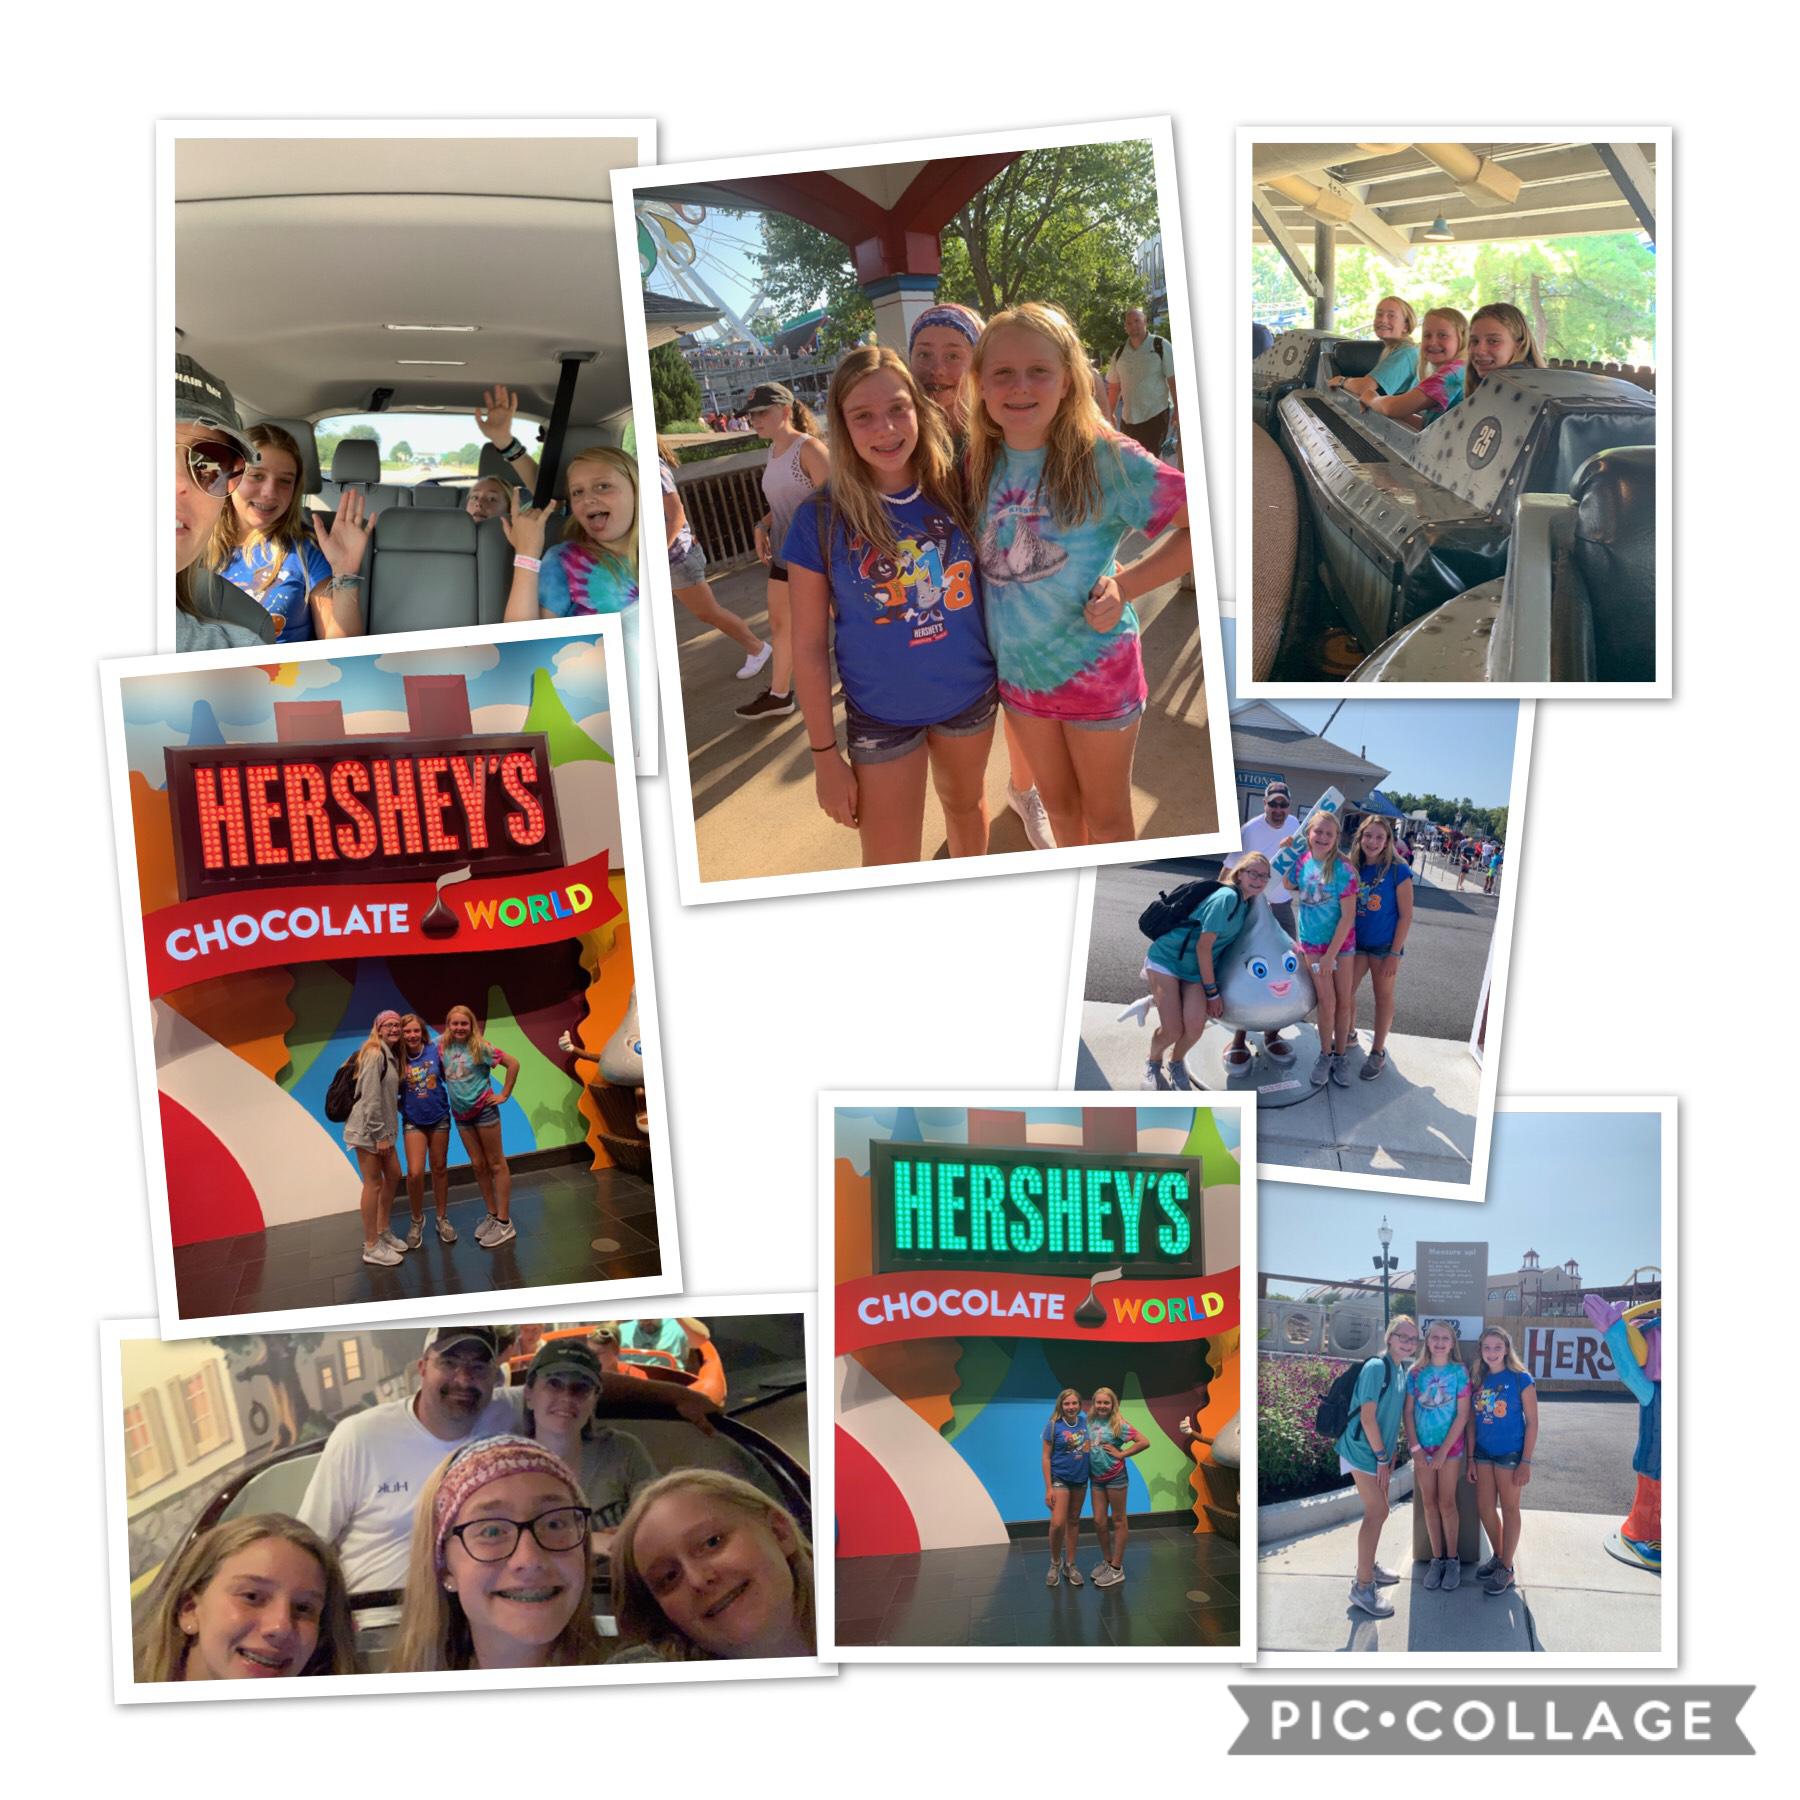 Fun at Hershey with my step family 